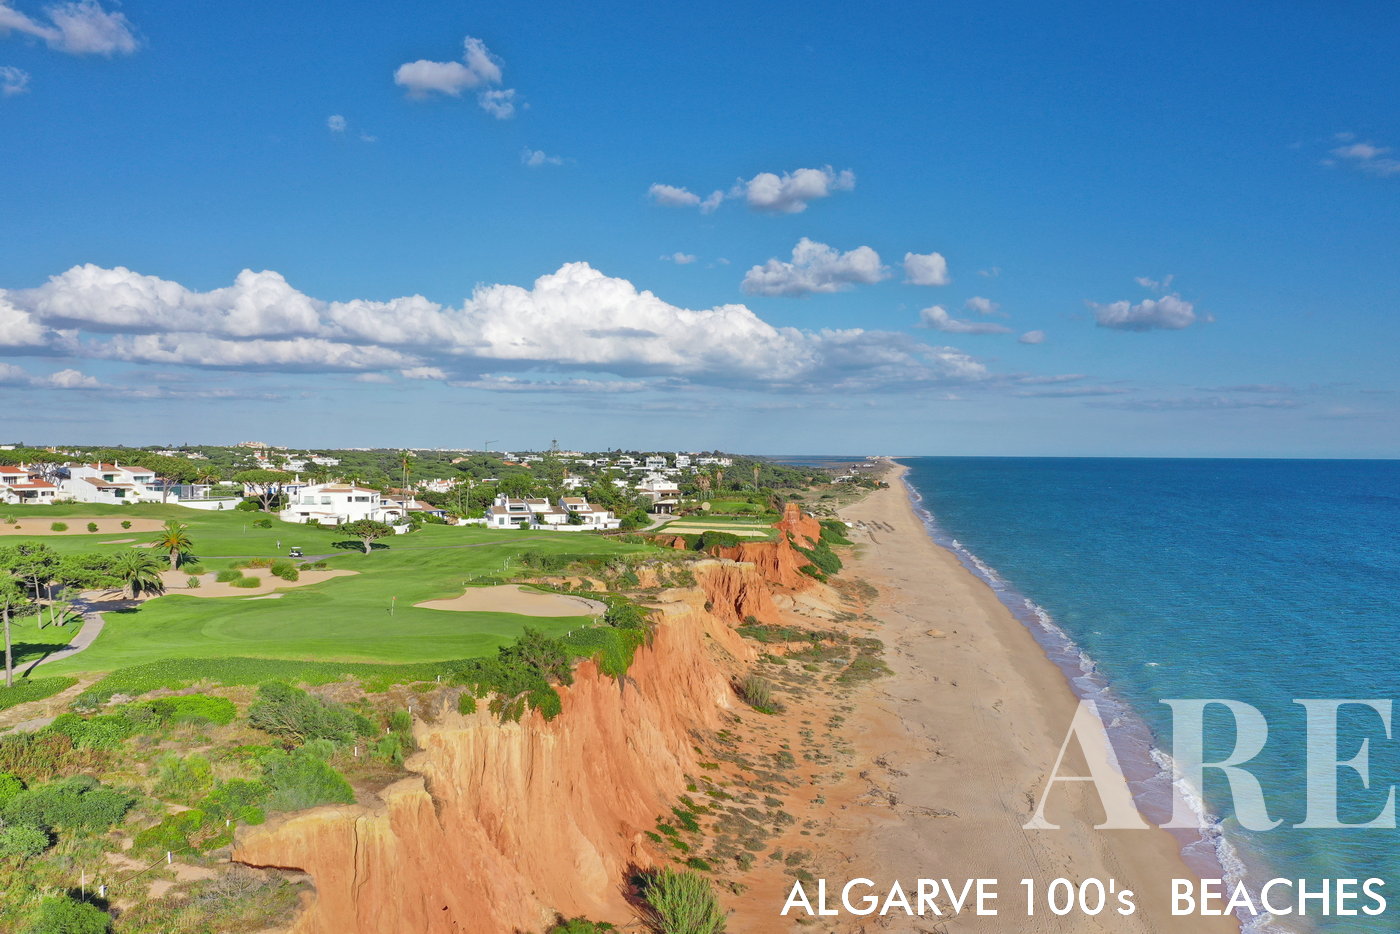 The view from the 16th hole of Vale do Lobo golf course offers a spectacular panorama that combines the lush green fairways with the breathtaking beauty of the adjacent beach. As golfers stand on the tee box or fairway, they are treated to a picturesque scene where the meticulously maintained golf course seamlessly merges with the sandy shores and the azure waters of the ocean.